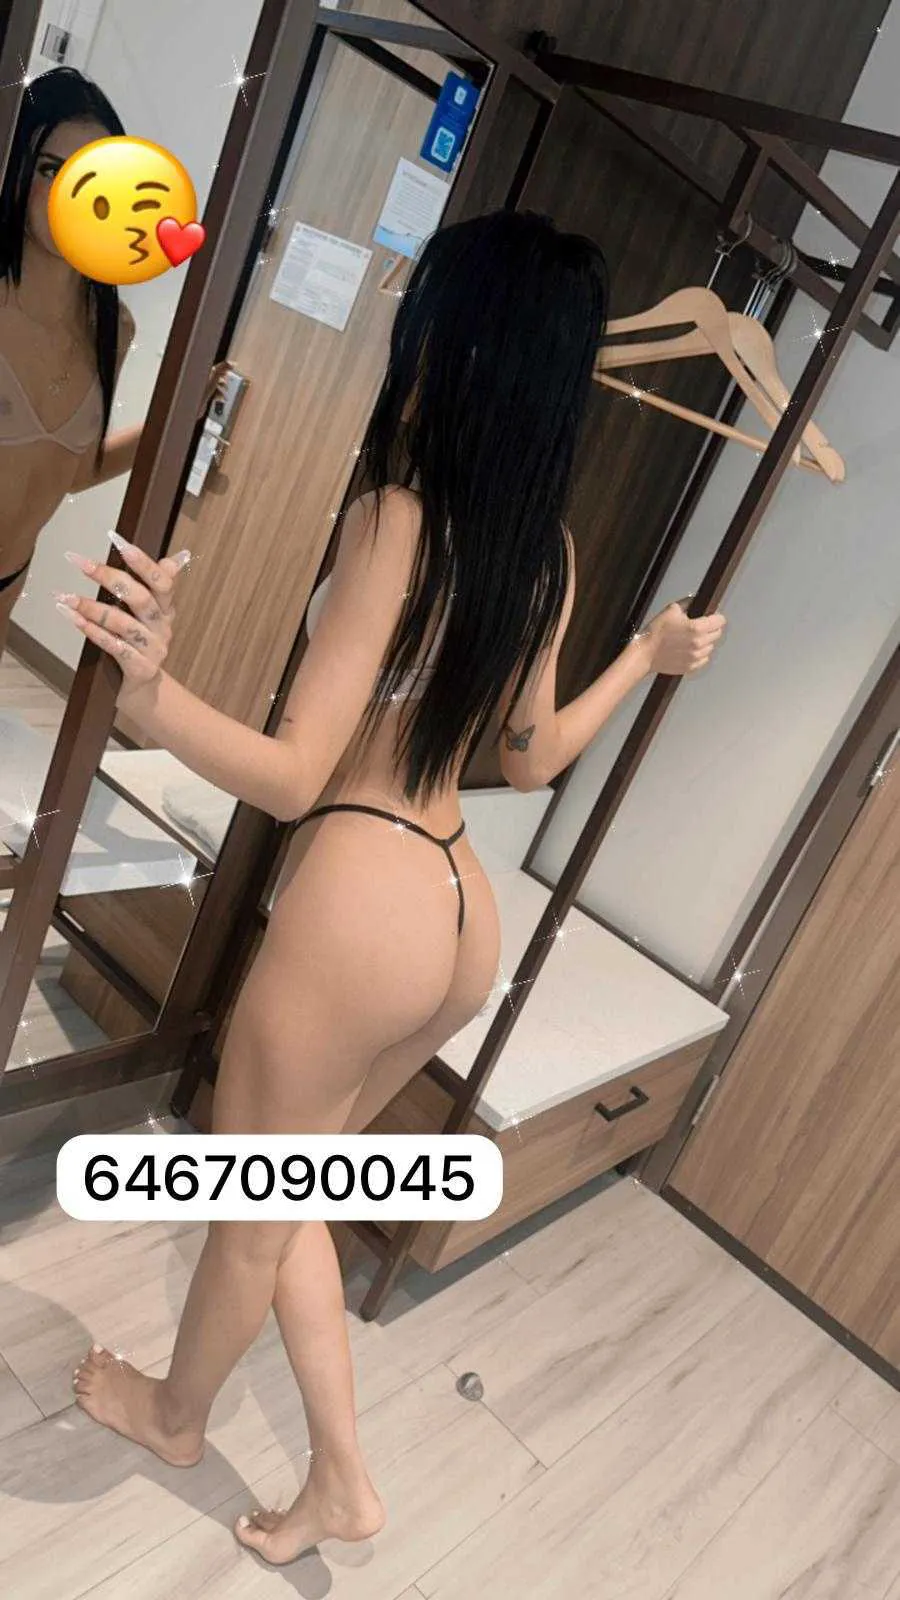 Reviews about escort with phone number 6467090045